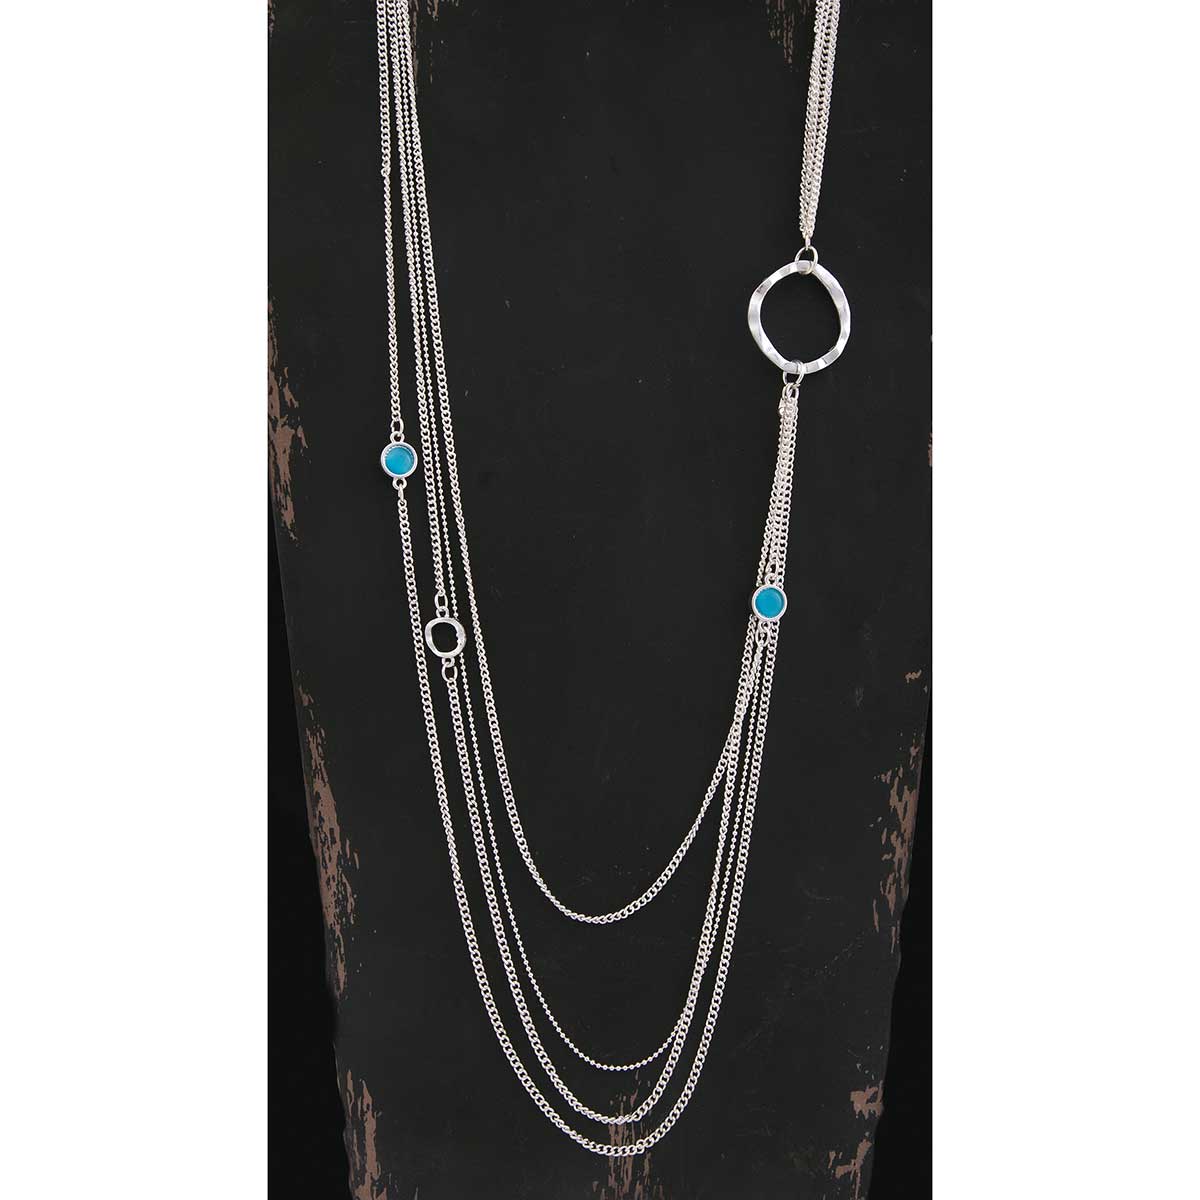 2 Blue Stones on Silver 4 Strand Chain Necklace 38"-41" 50sp